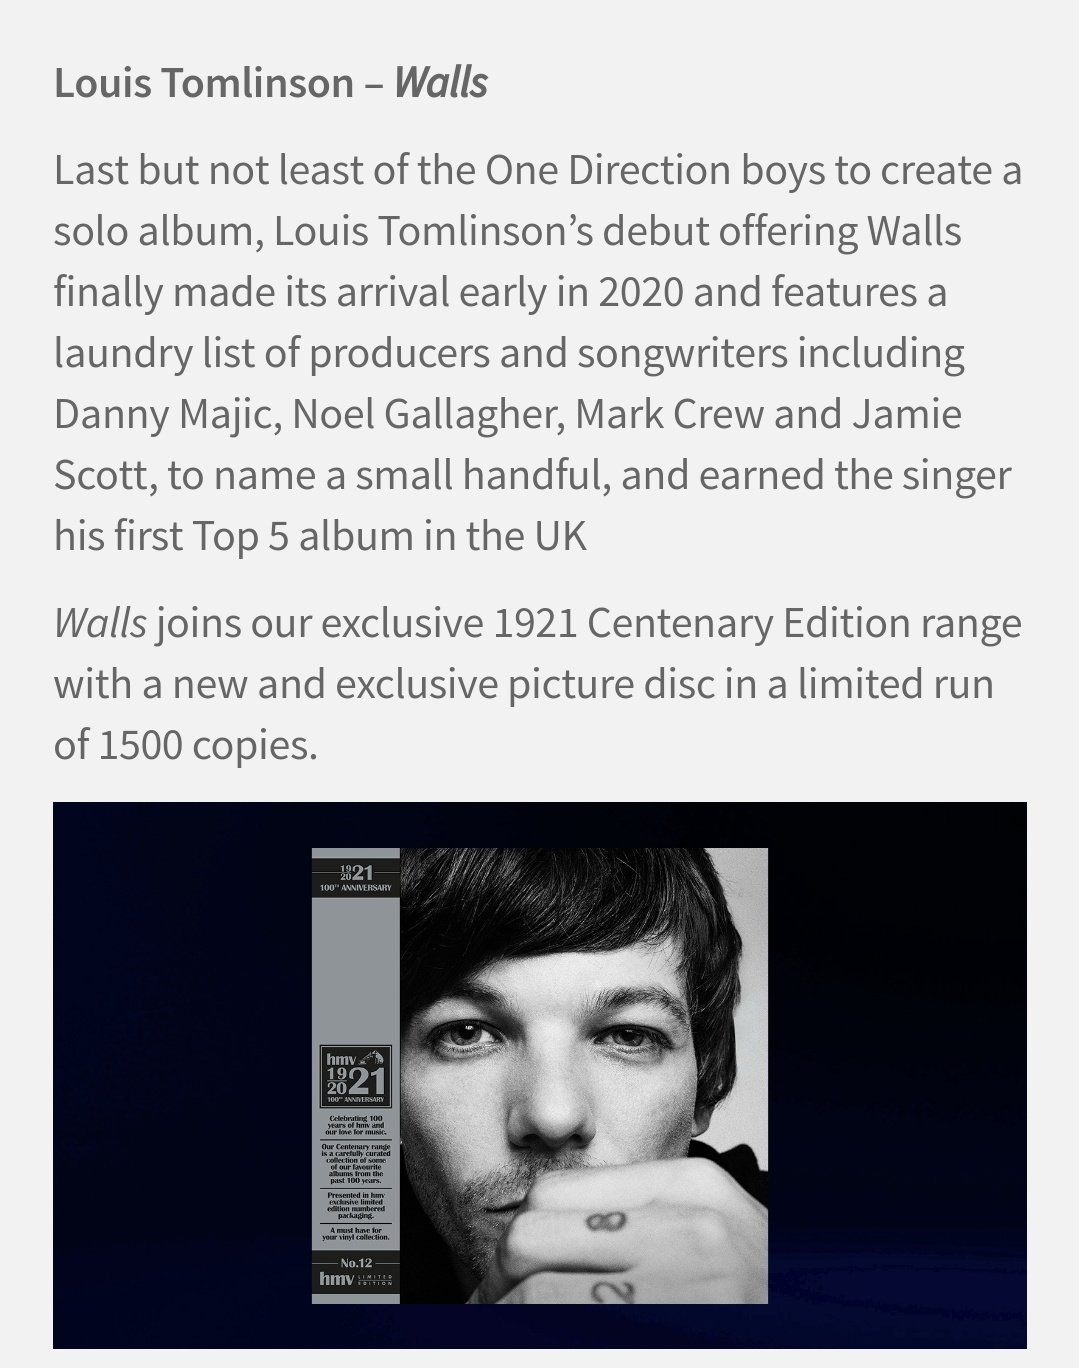 Louis Tomlinson News on X: #Update  A brand new Walls Picture Disc (HMV  exclusive vinyl) will be released on HMV's 100th anniversary, July 24th!  Its been marked sold out online but